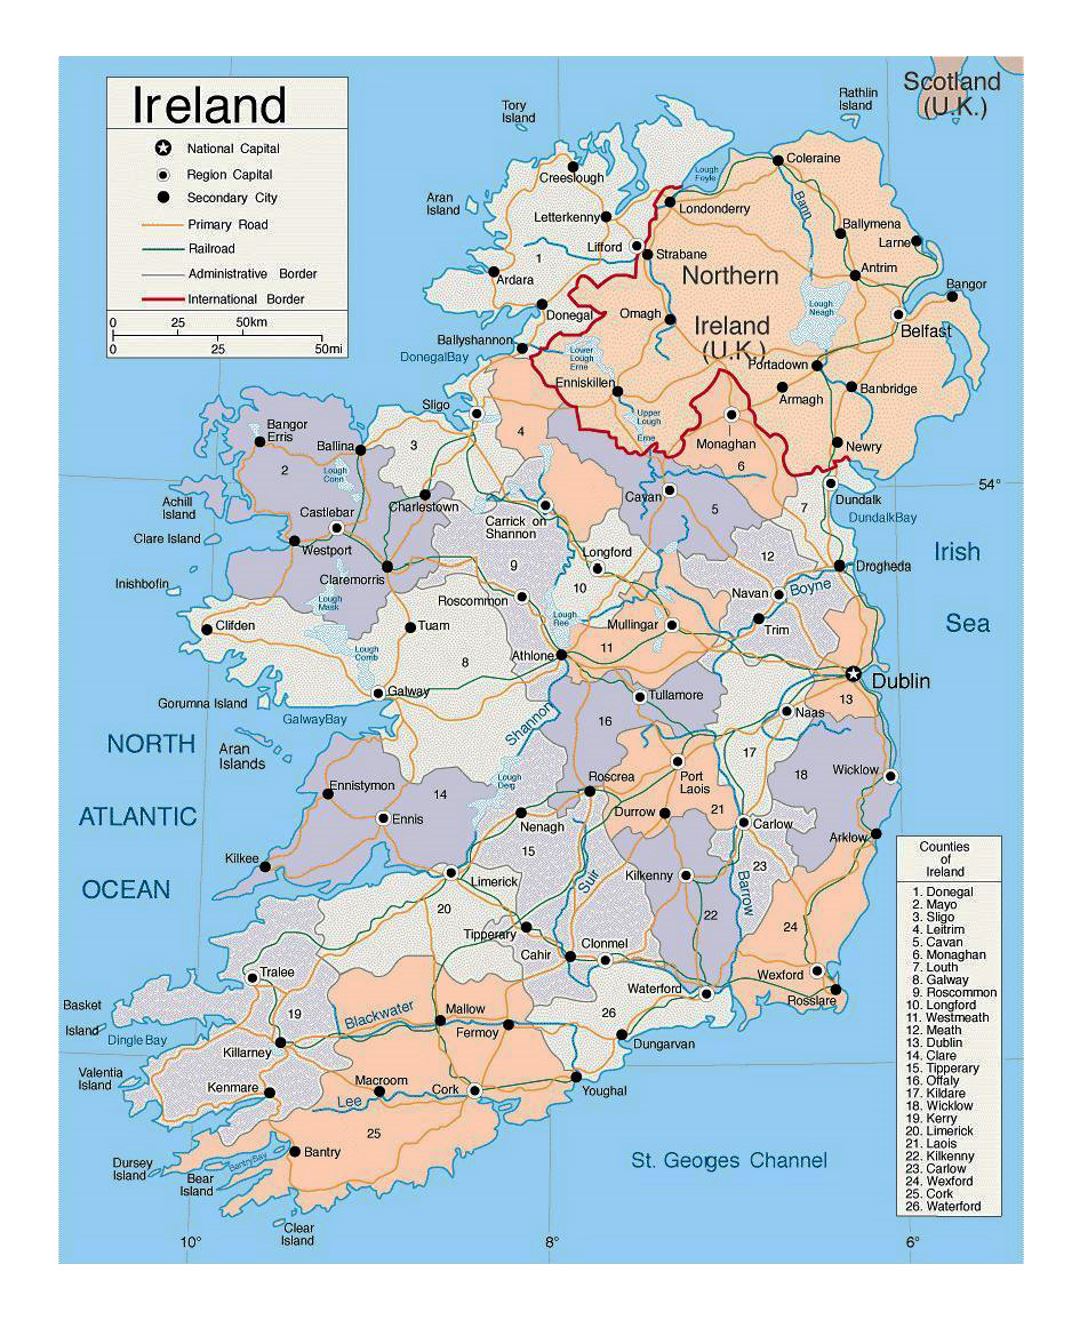 Detailed political and administrative map of Ireland with roads and major cities